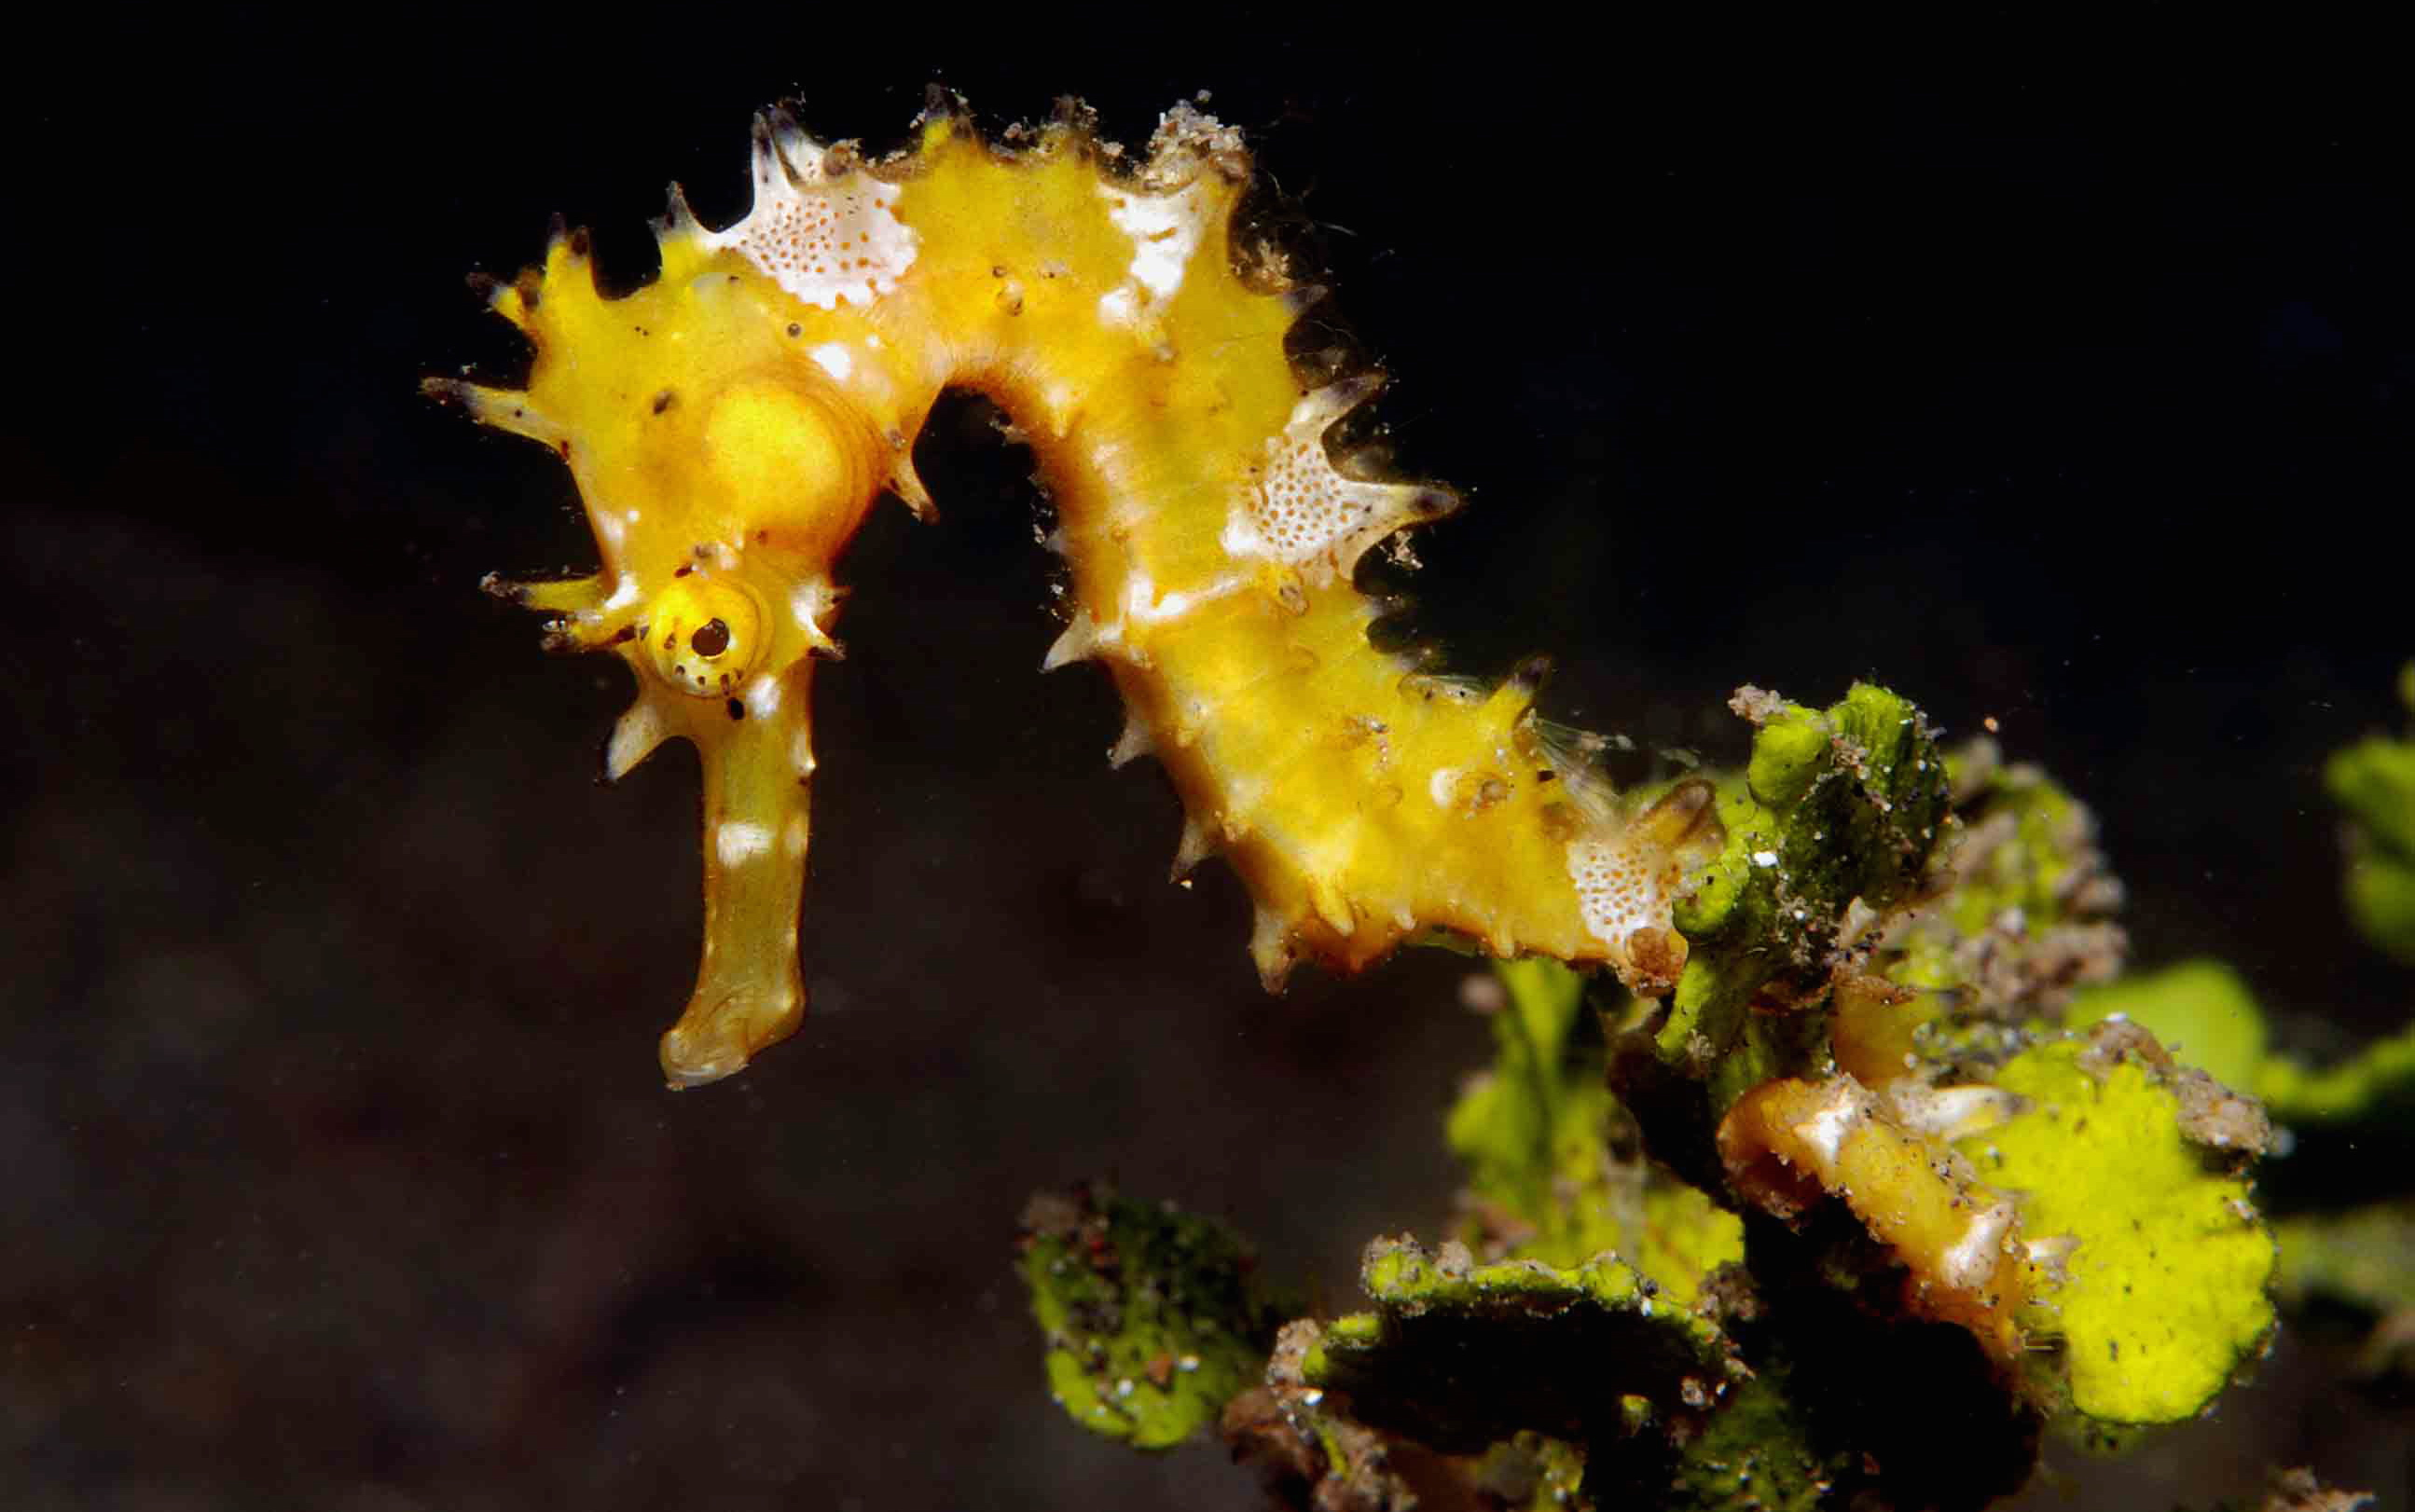 For seven years, NatureServe Chief Scientist Healy Hamilton has been on a mission to advance knowledge of the family Sygnathidae, which includes this tiny seahorse - Hippocampus histrix - she spotted in the waters off Australia. | Photo by Graham Short